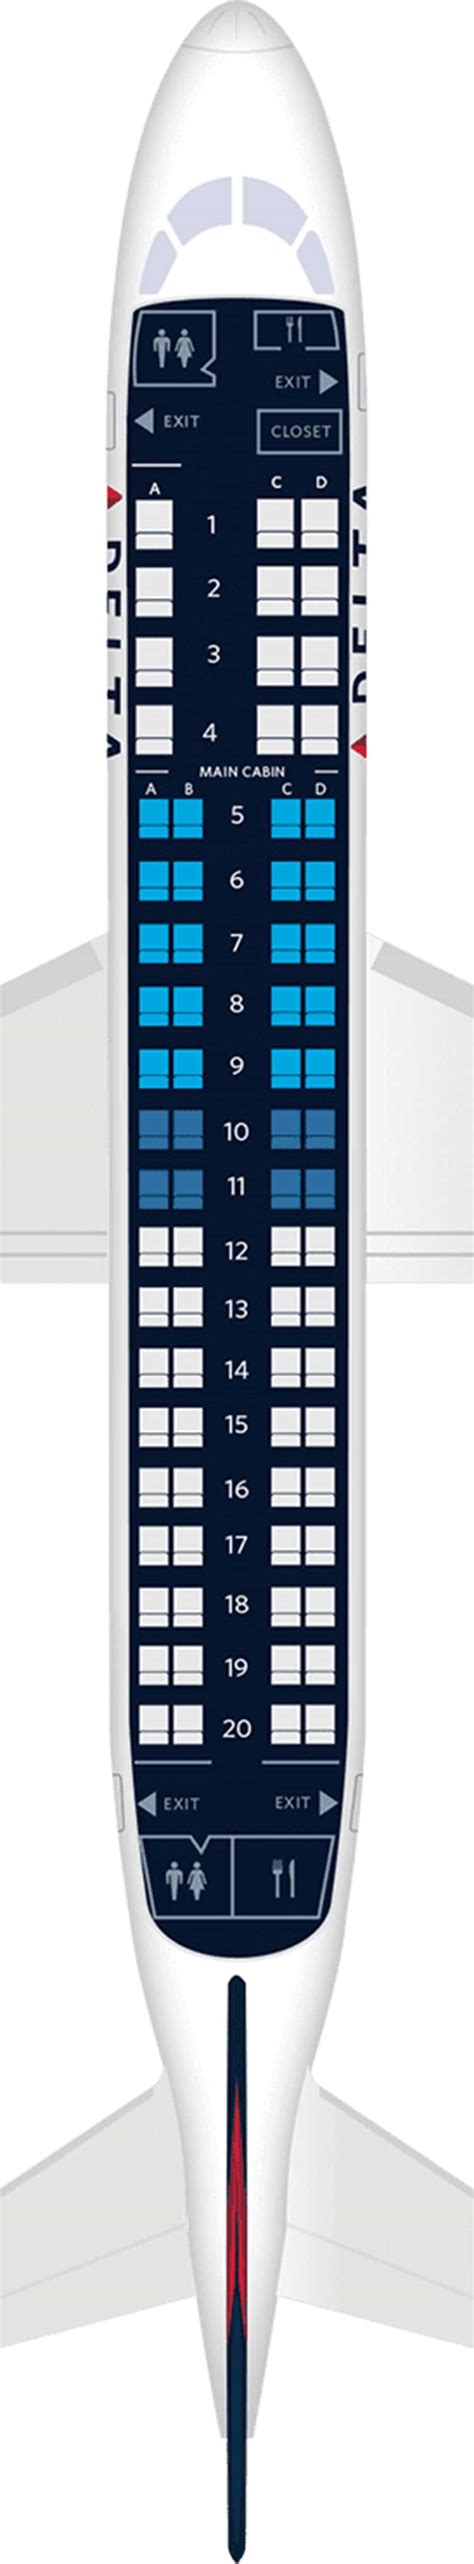 Embraer E-175 (E75) Layout 1 Delta Seat Maps There are 2 versions of this aircraft. Check Version Do you know this plane? Seating details Seat map key Traveler photos (17) View all In-flight amenities Internet Food Delta Airlines offers access to the internet using Gogo service. Connectivity is available for laptops and mobile devices.. 